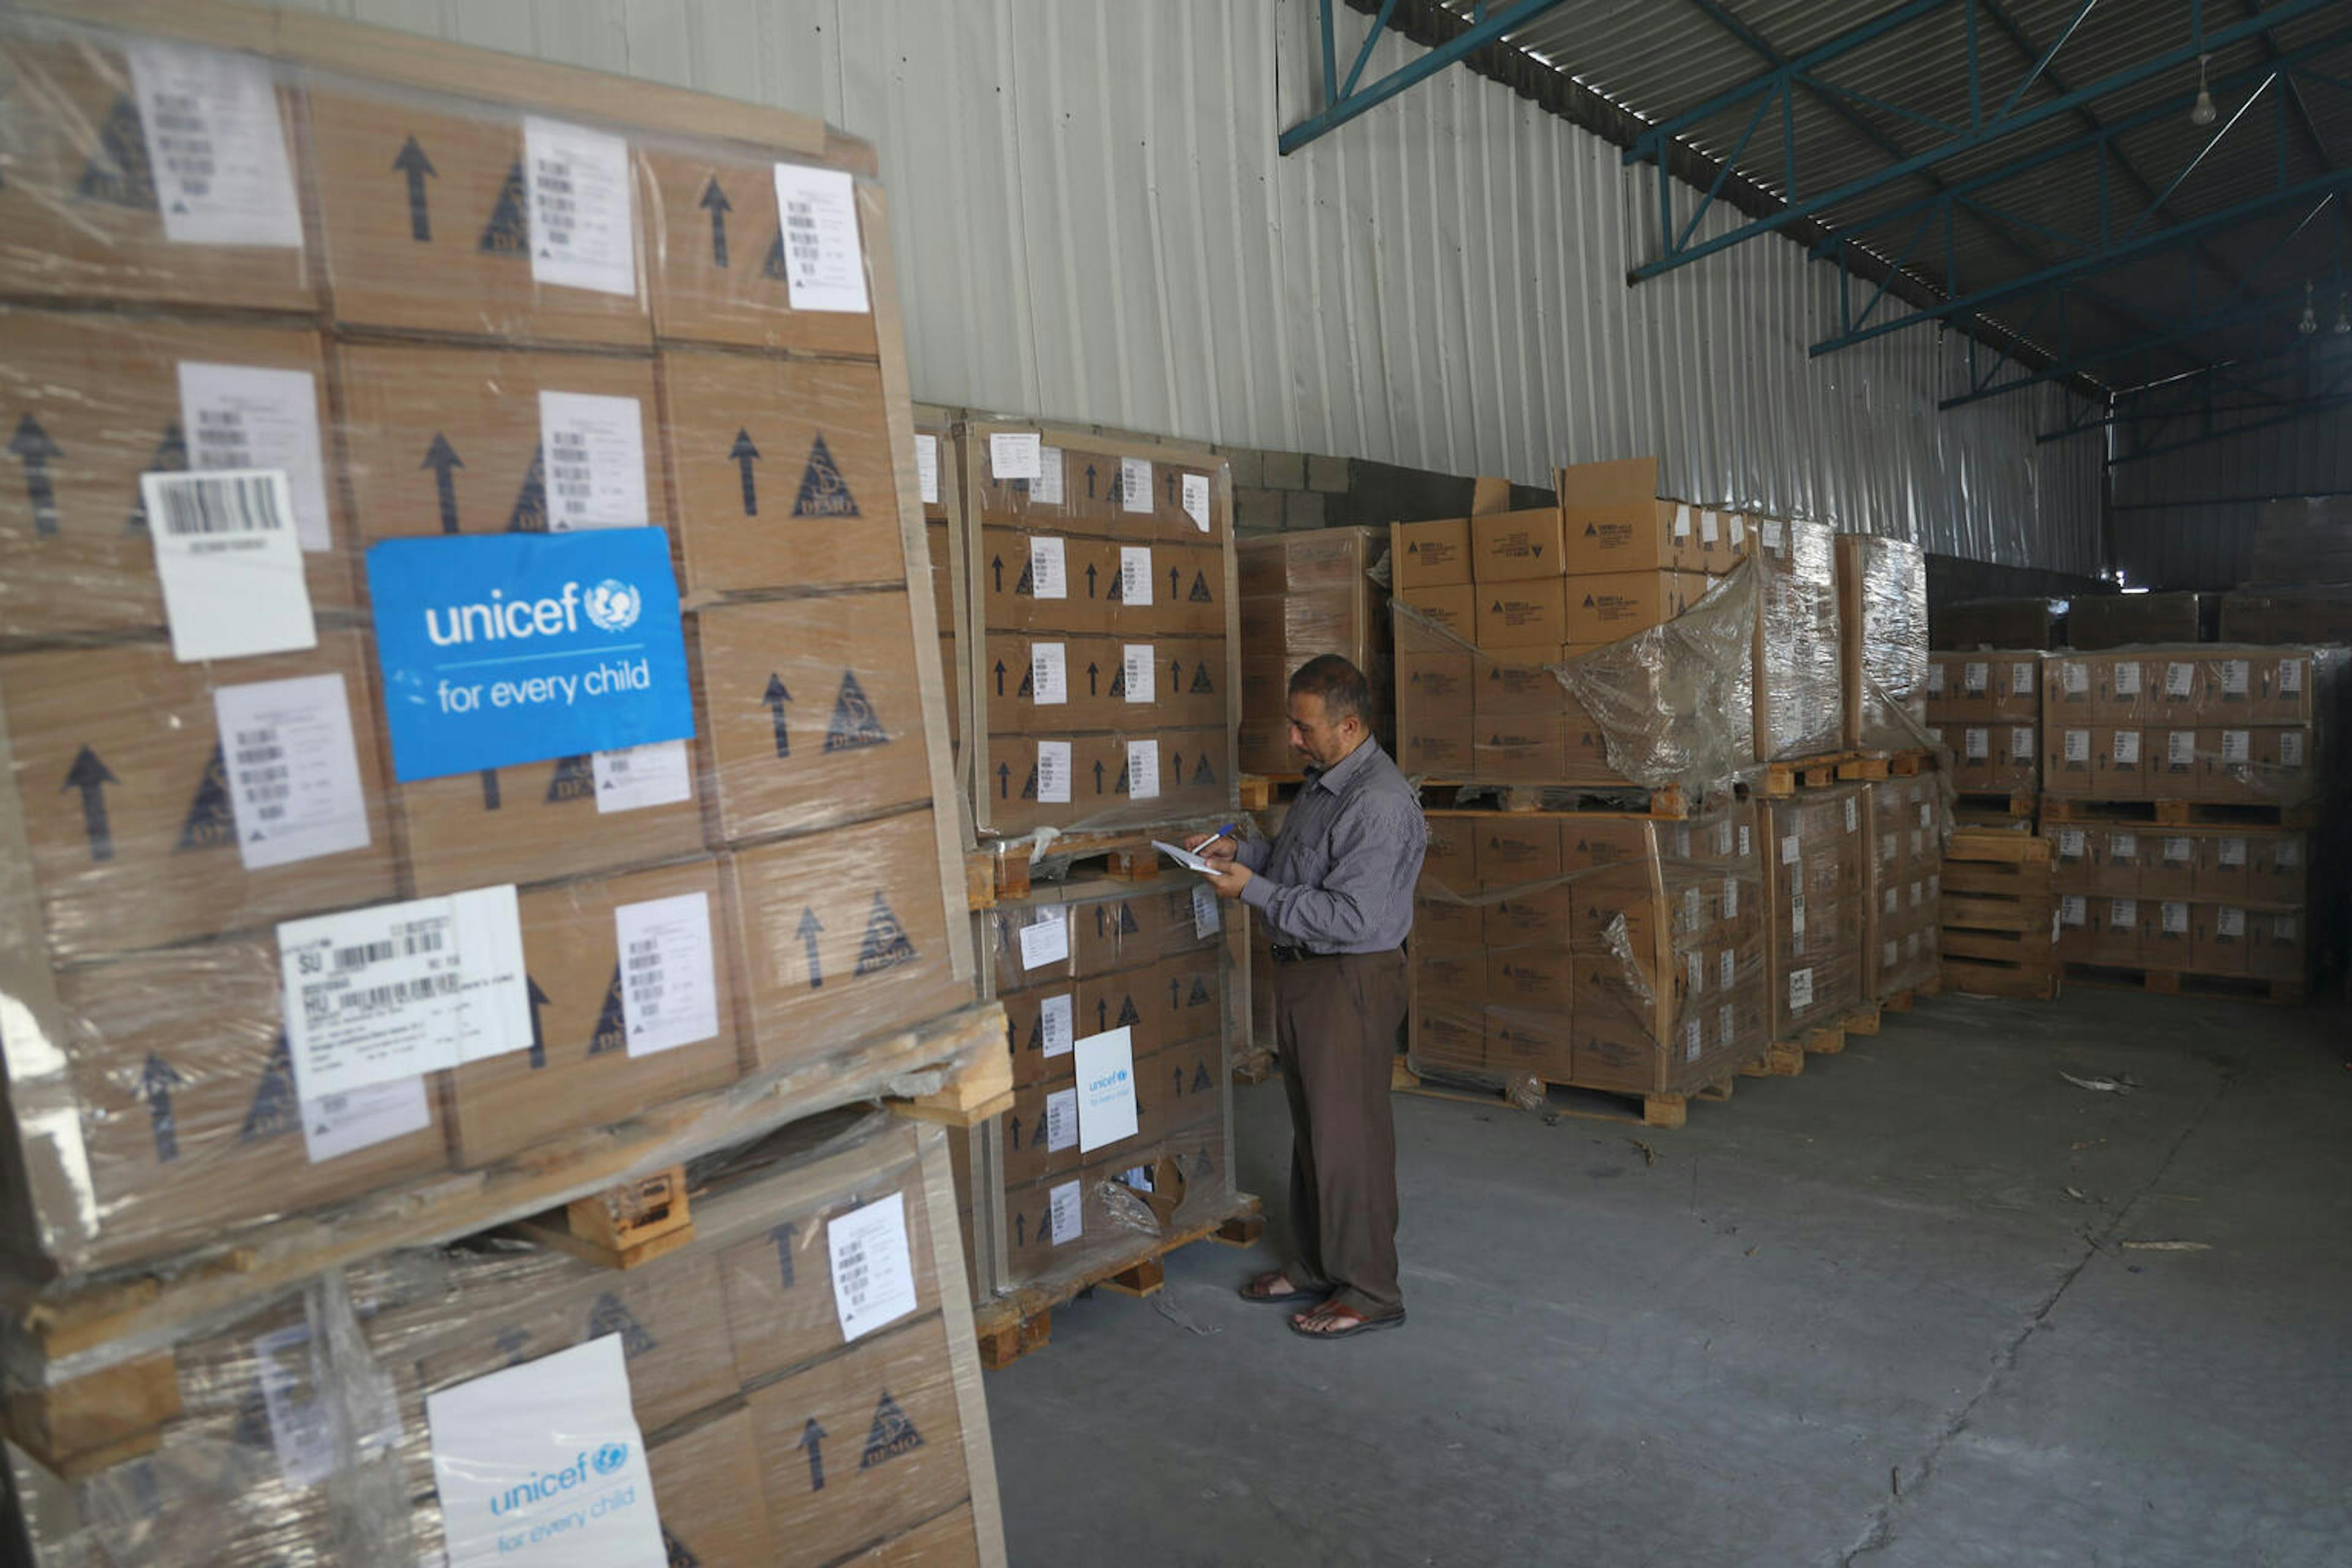 UNICEF delivers life-saving medicines and fluids in the Gaza Strip, including 800 cartons of antibiotics and 3,000 cartons of IV fluids amidst the escalating hostilities.